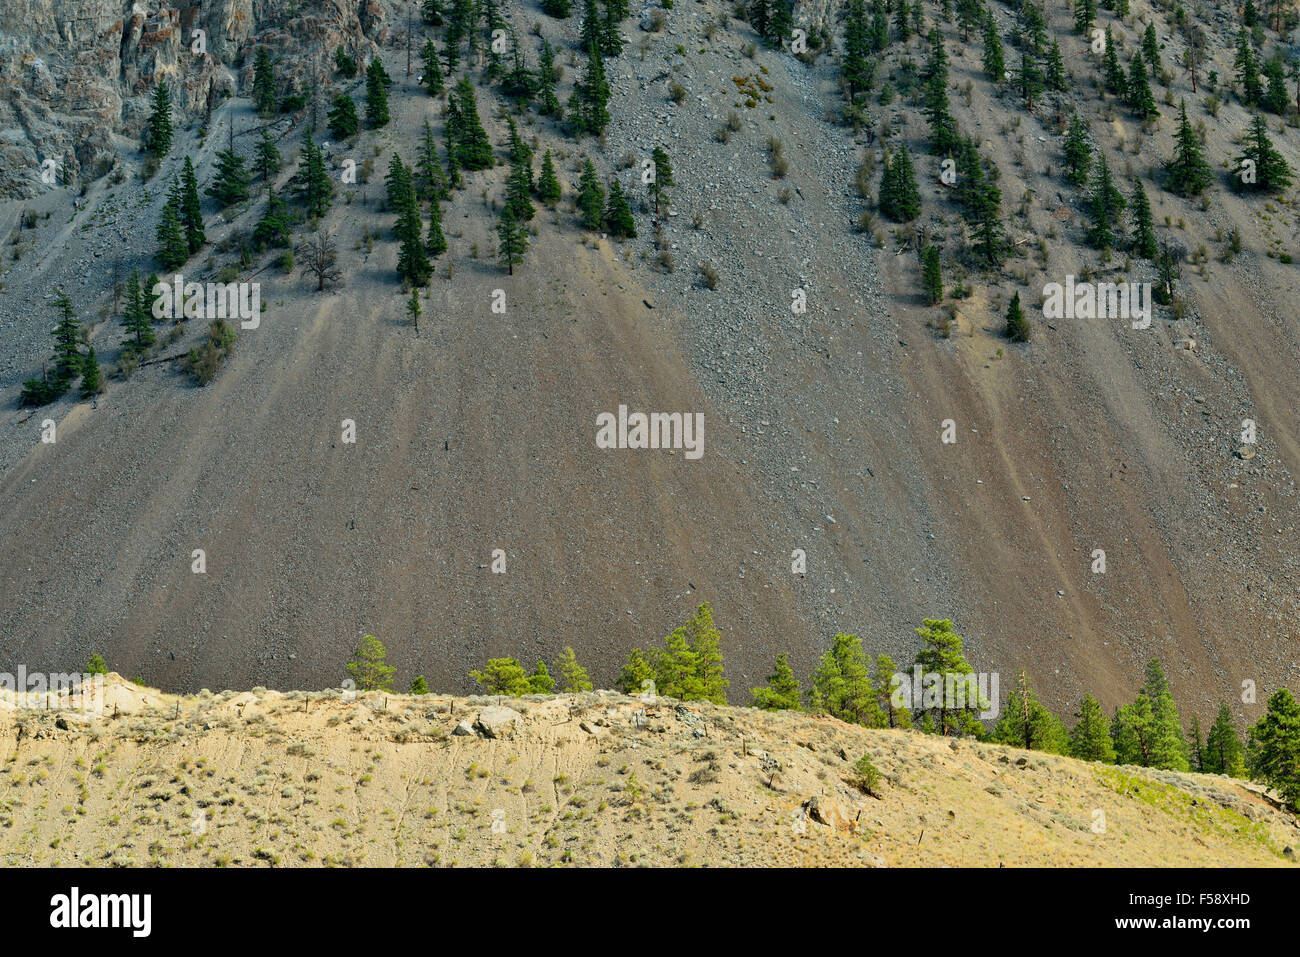 Scree Slope in the Thompson River Valley, Highway 1 Quesnel to Hope, British Columbia, Canada Stock Photo